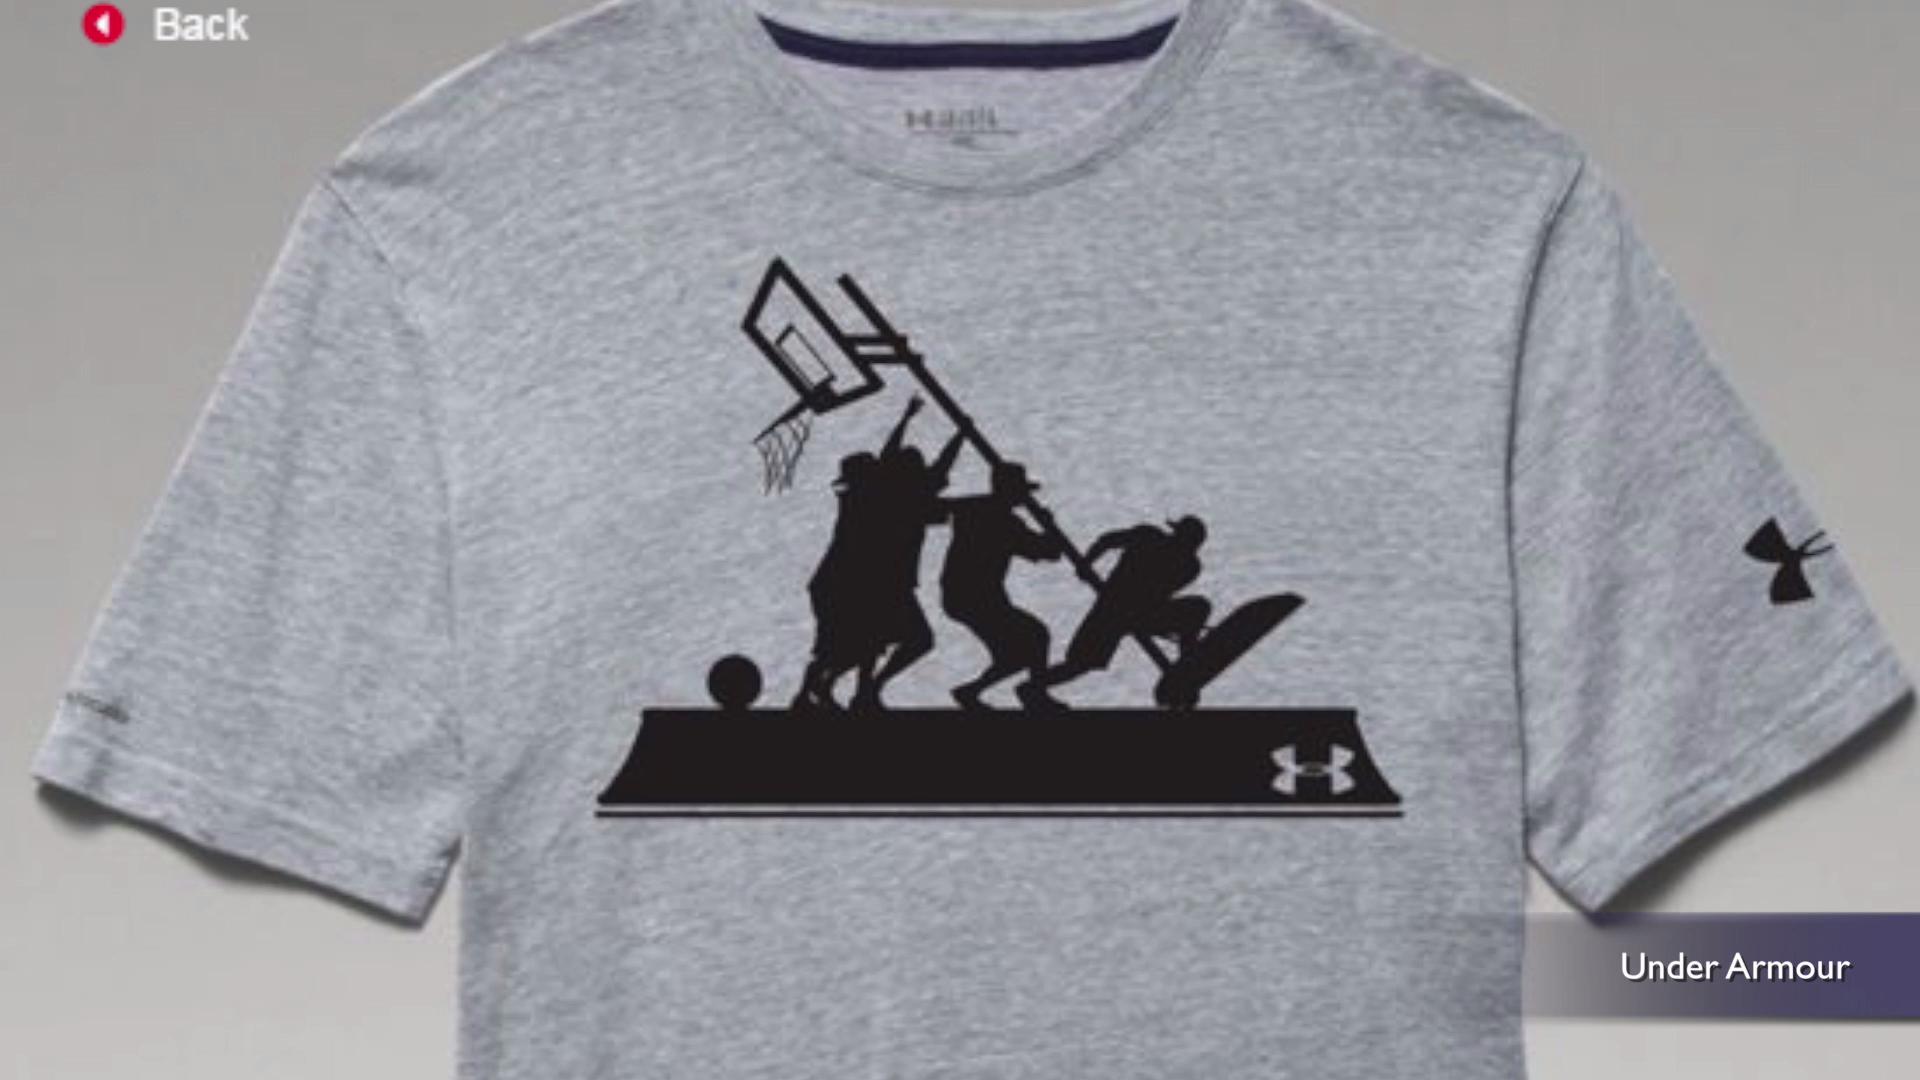 Under Armour pulls Iwo Jima-inspired 'Band of Ballers' t-shirt